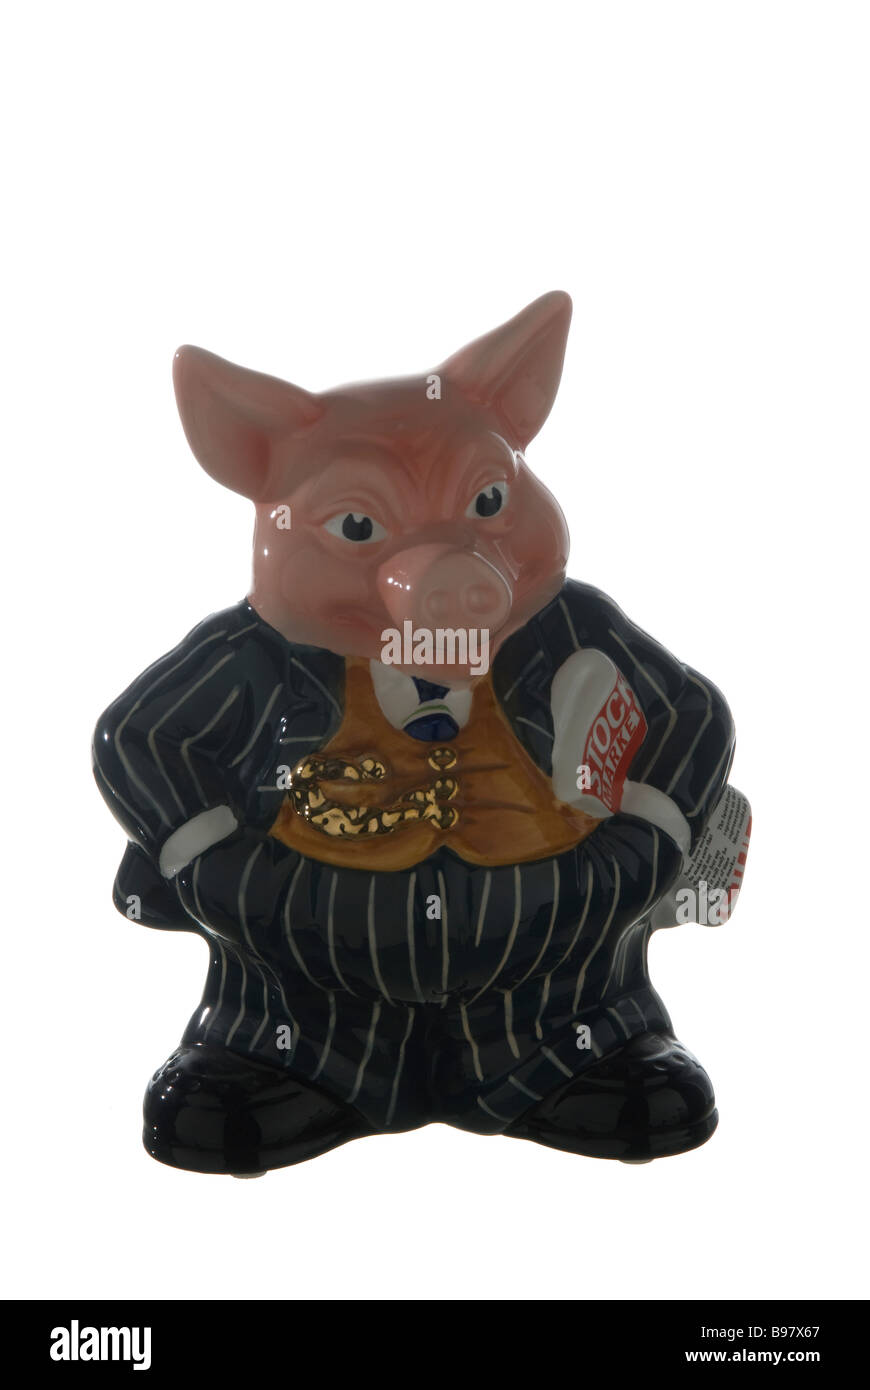 Pig shaped Piggy Bank in City pinstripe suit Stock Photo